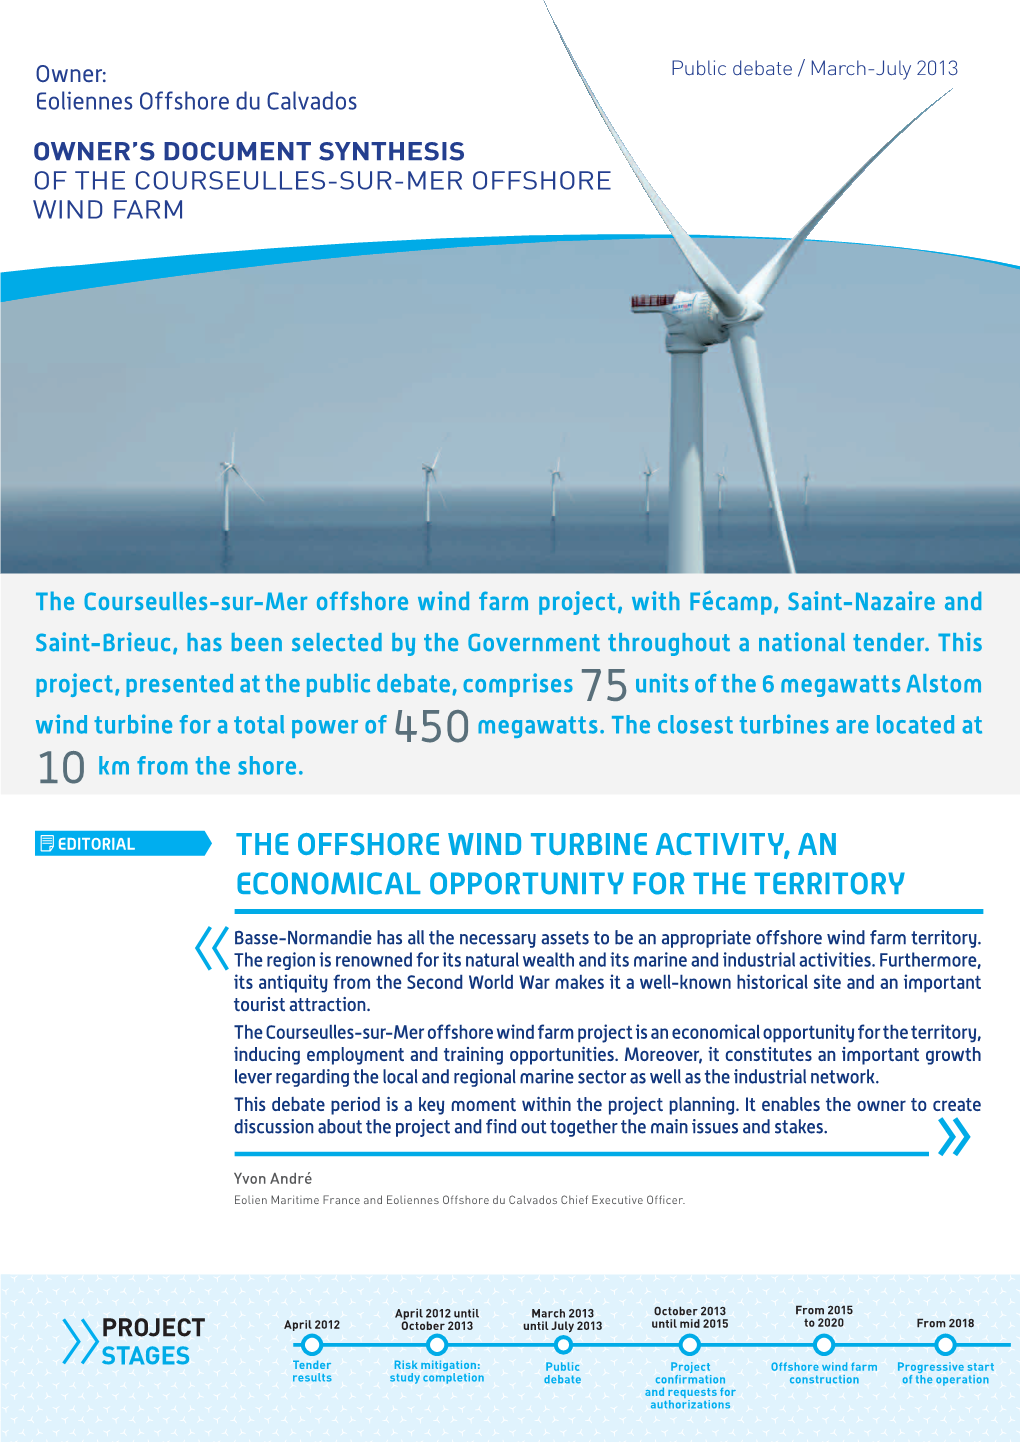 The Offshore Wind Turbine Activity, an Economical Opportunity For